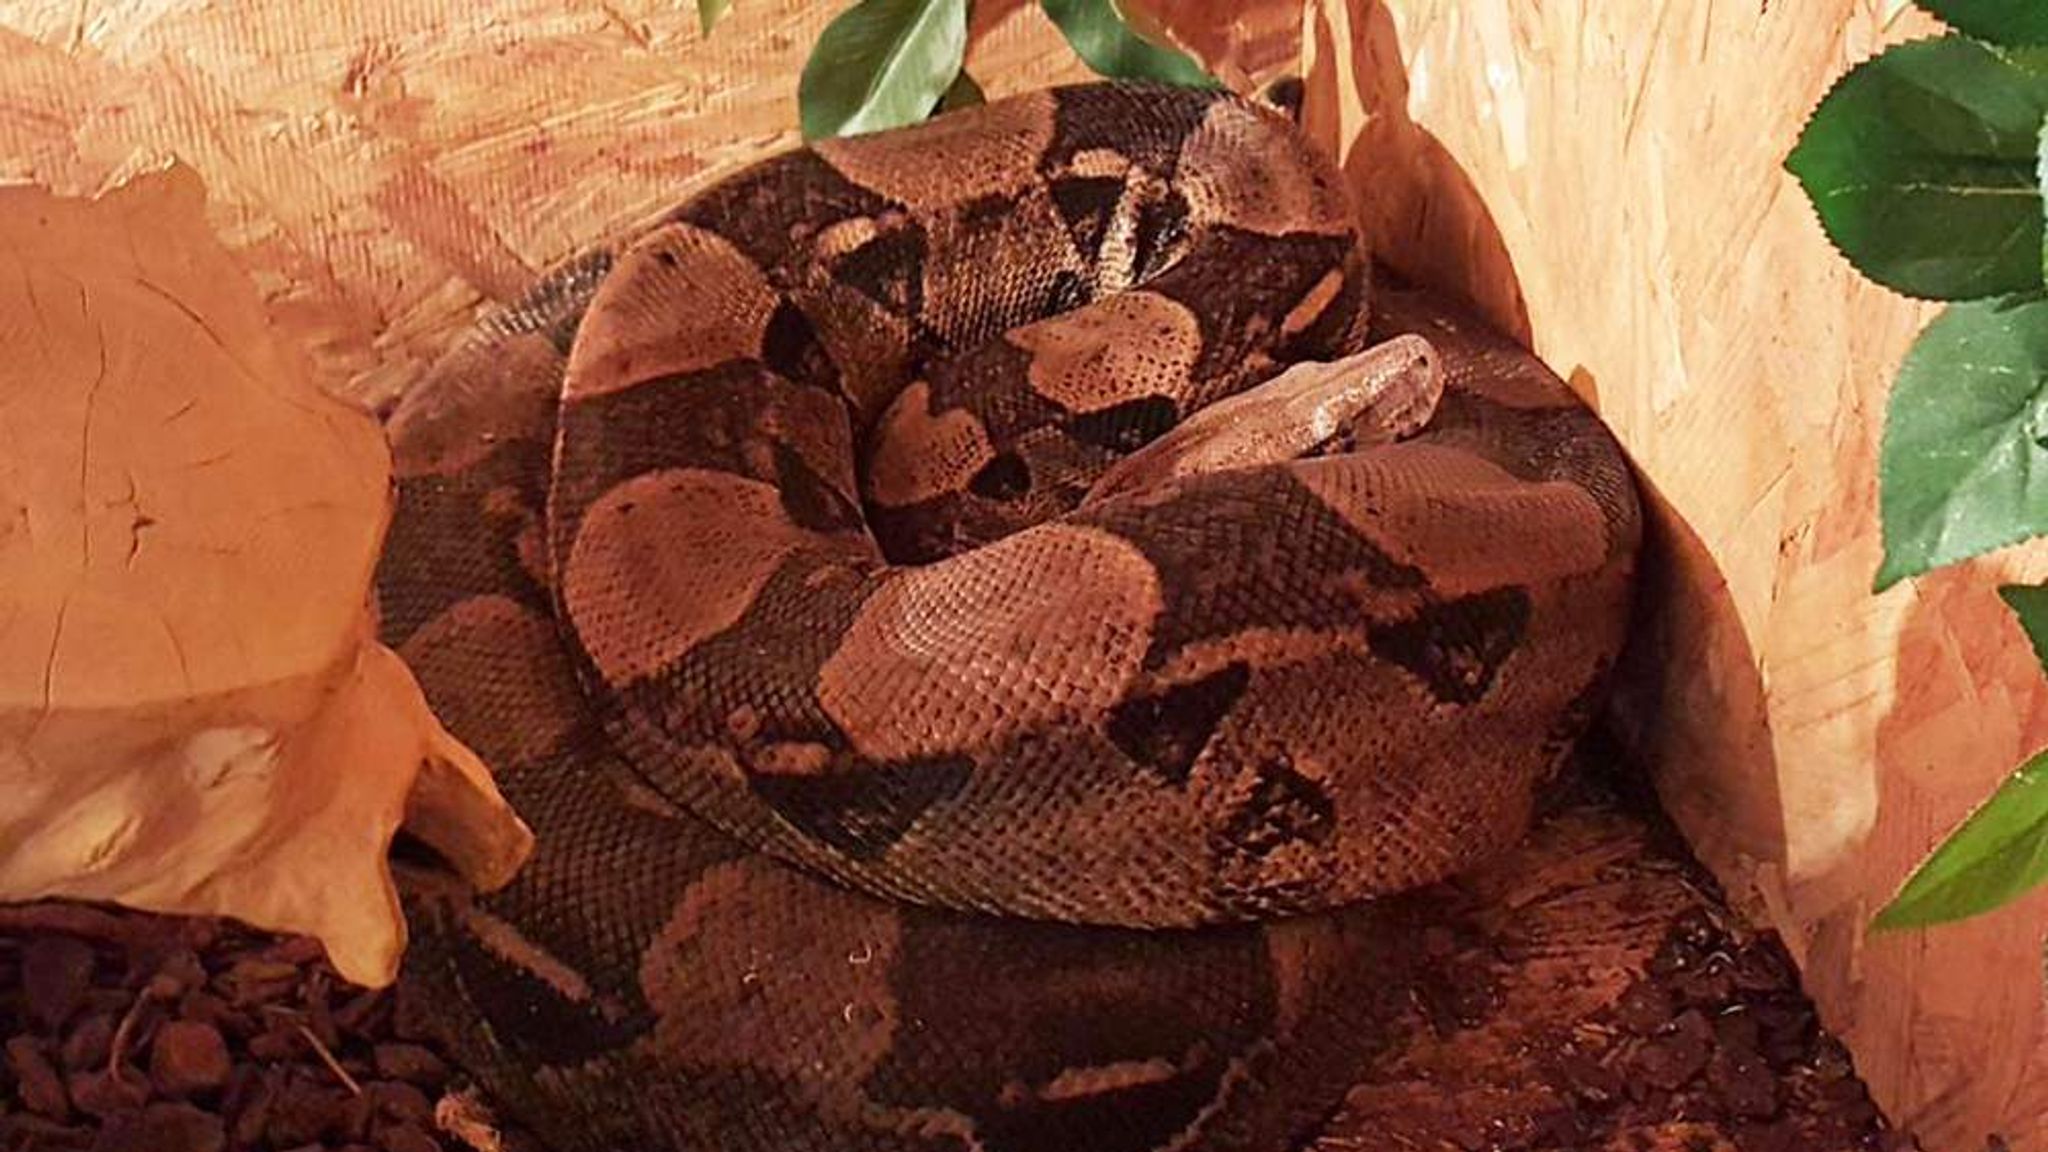 pet boa constrictor in mobile home park